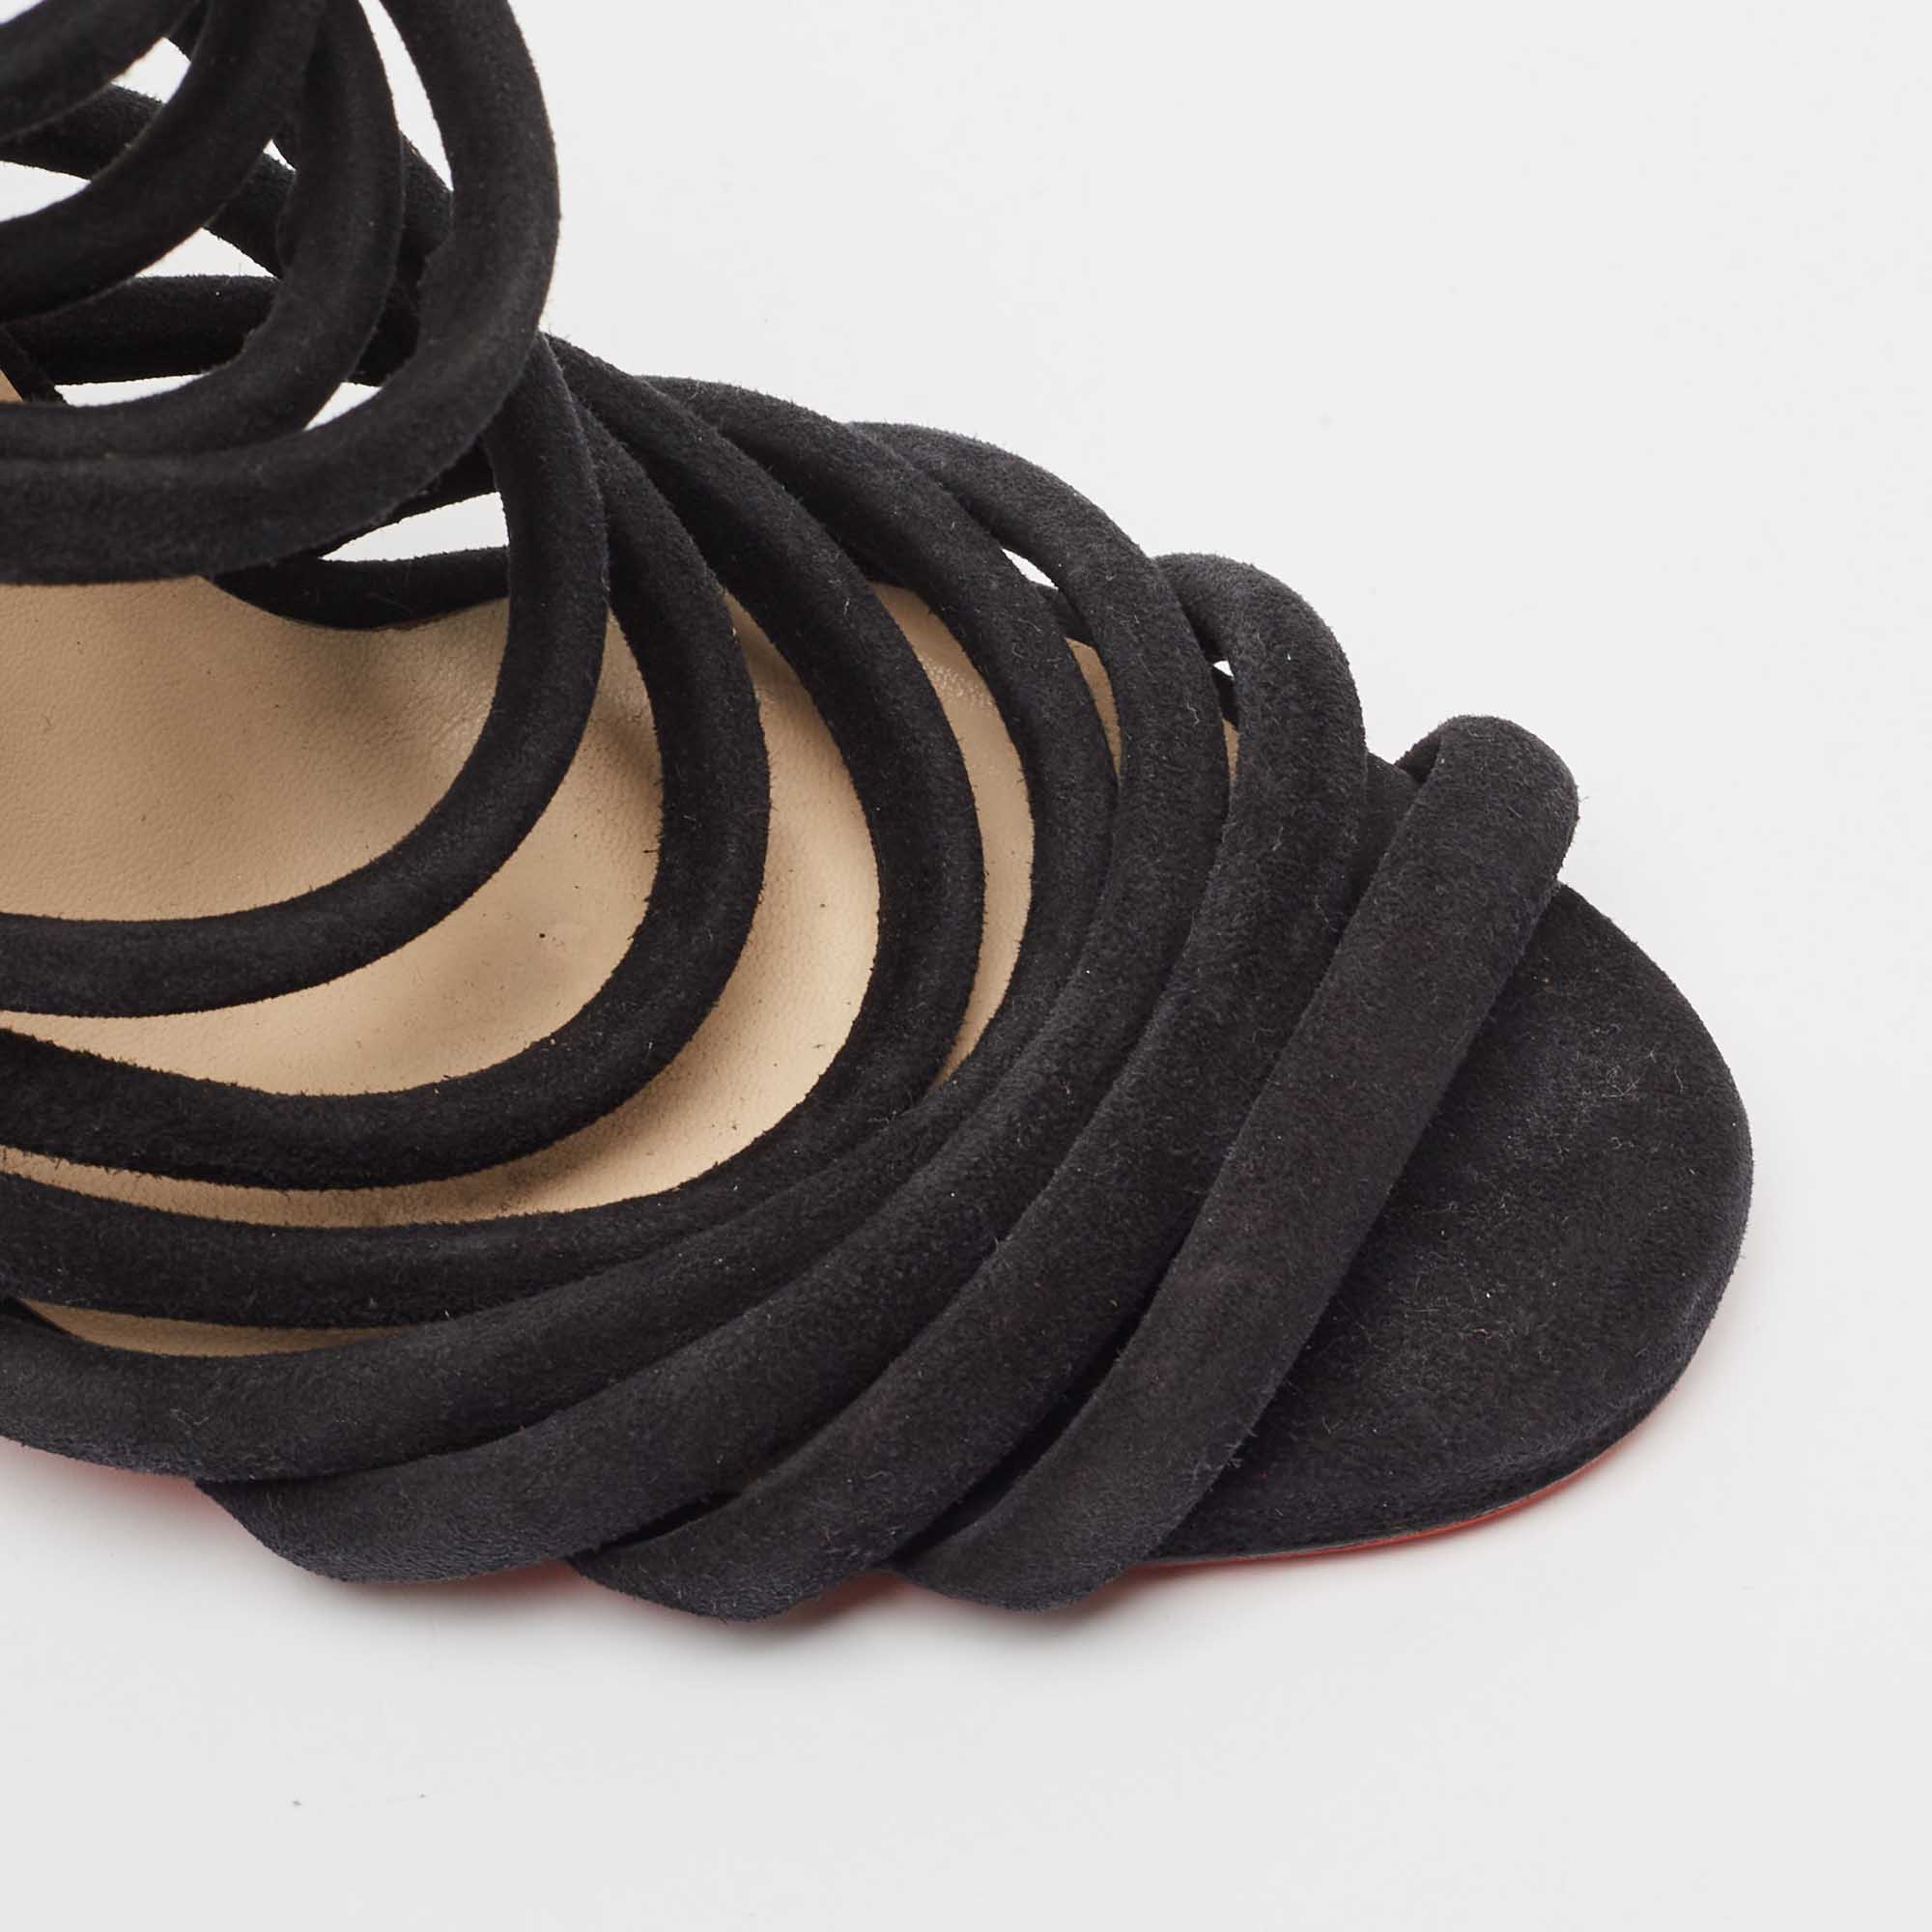 Christian Louboutin Black Suede Strappy Sandals Size 38.5